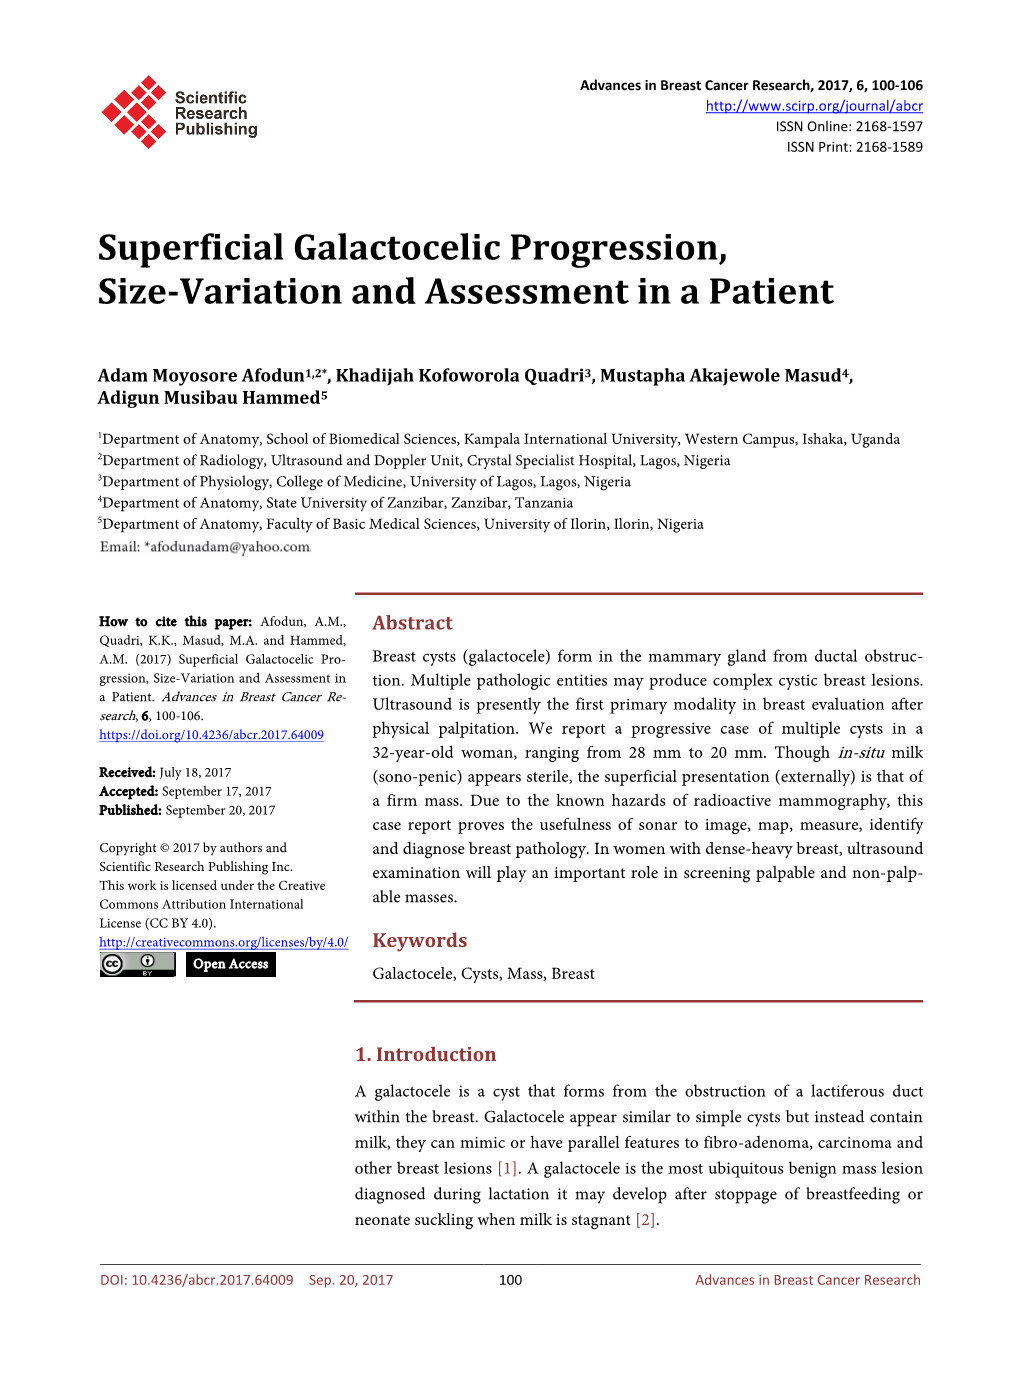 Superficial Galactocelic Progression, Size-Variation and Assessment in a Patient